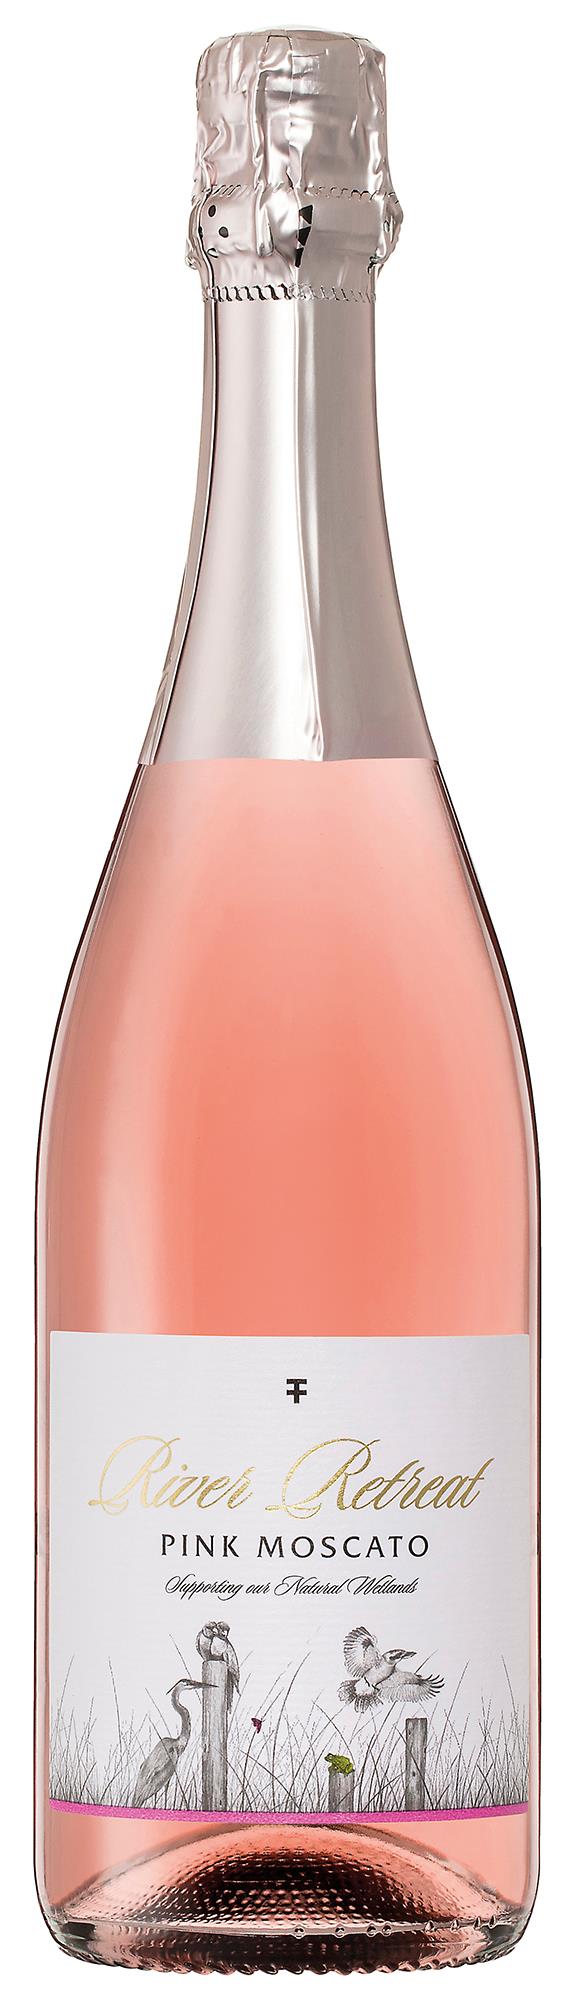 SPARKLING PINK MOSCATO TRENTHAM 75 cl 7%